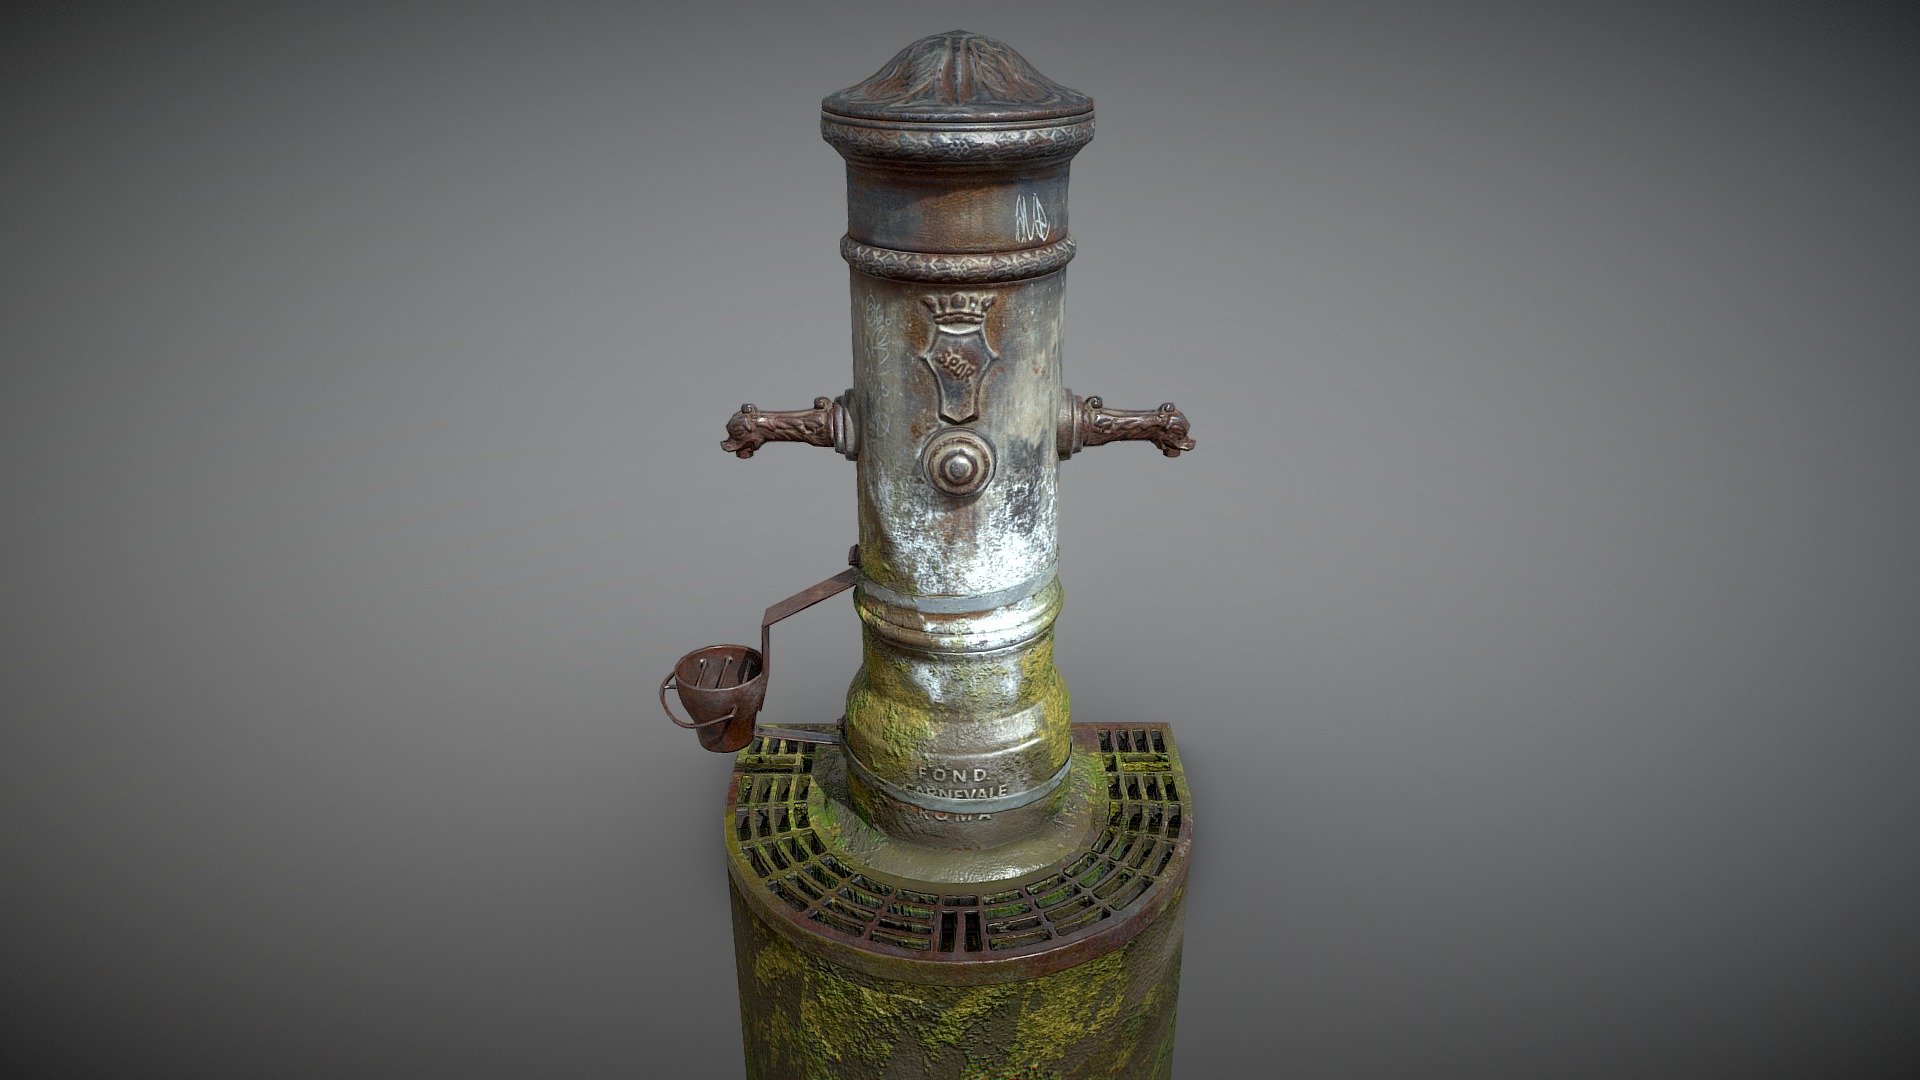 Artwork with that model: https://www.artstation.com/artwork/QroKN3

Game-ready optimized model.
A nasone (plural nasoni), also called a fontanella (plural fontanelle, lit. &ldquo;little fountains